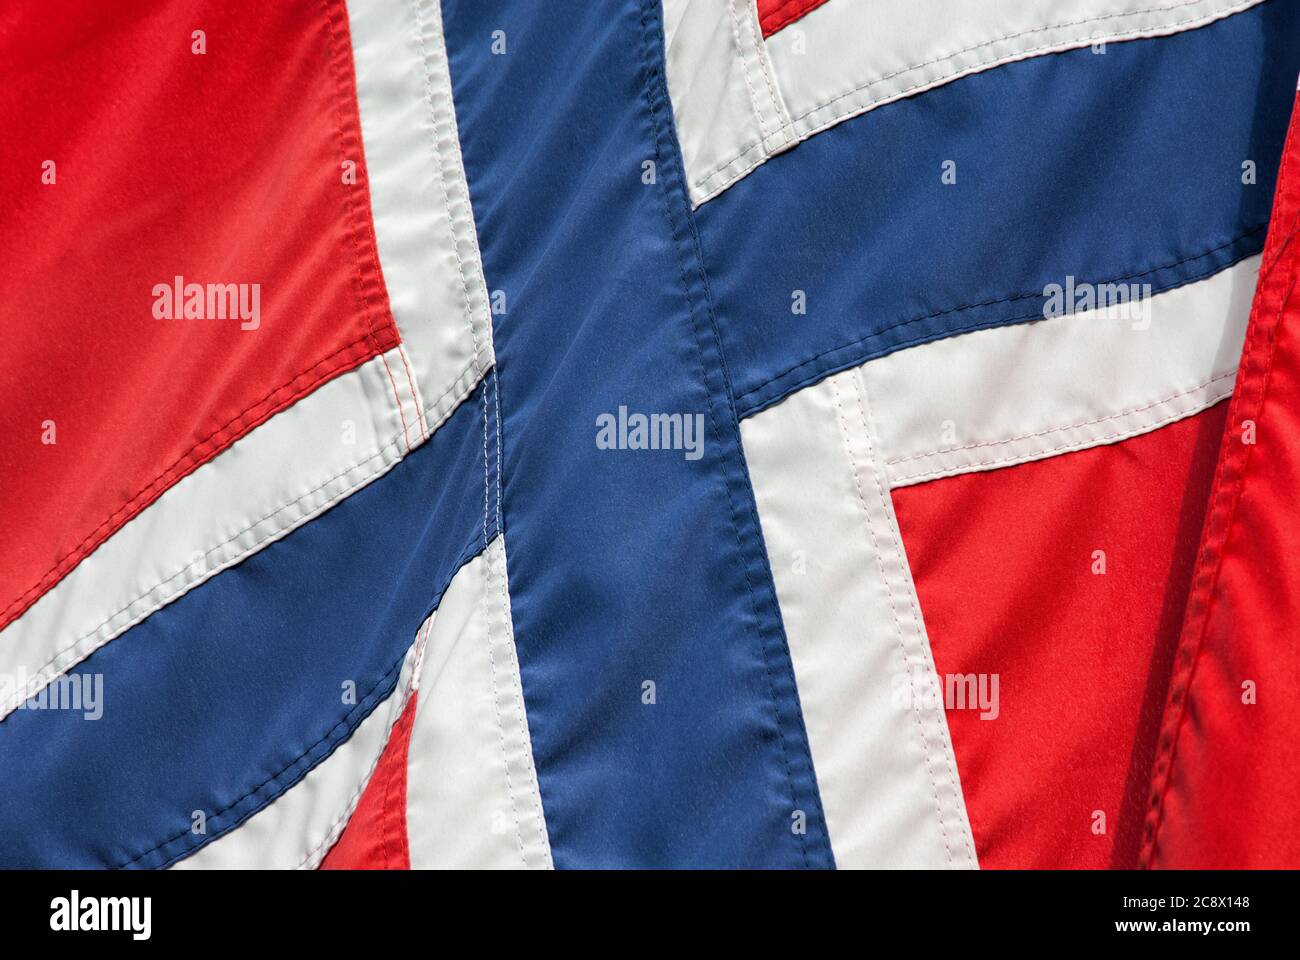 Close up of the Norwegian flag, blue cross on a red background Stock Photo